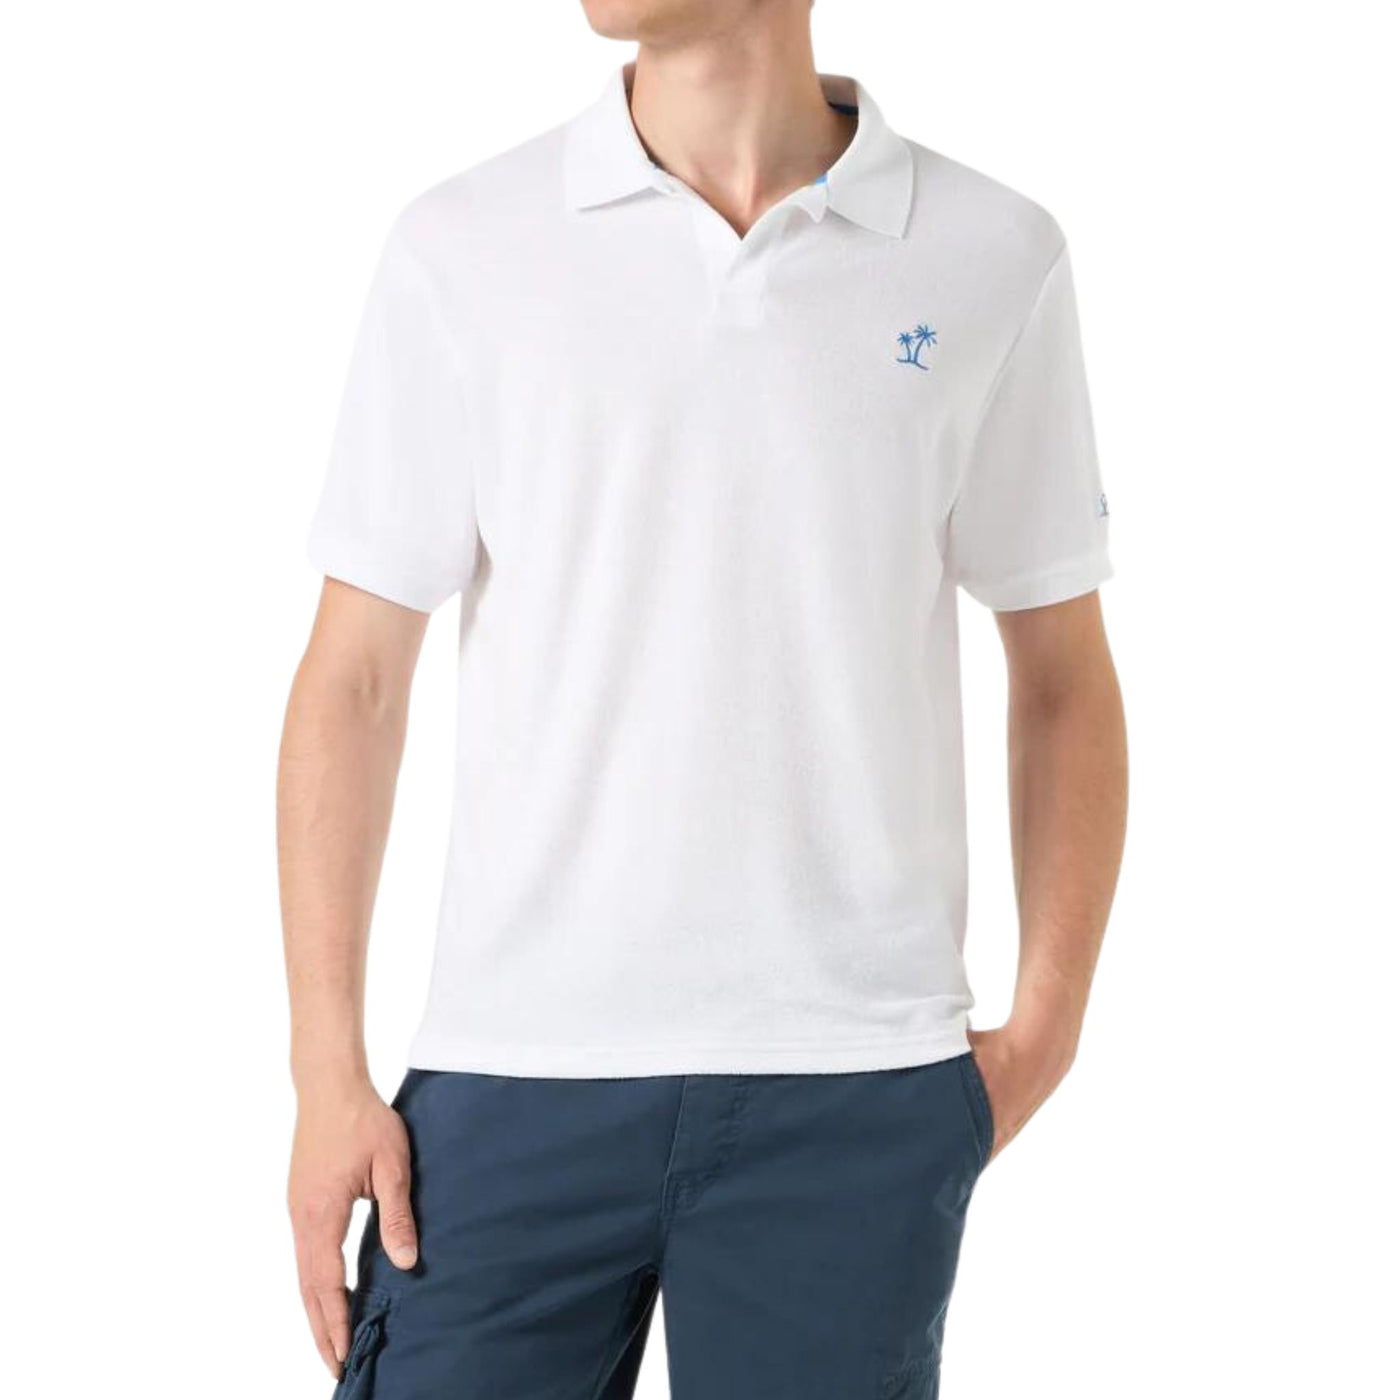 Men's polo shirt with palm tree embroidery